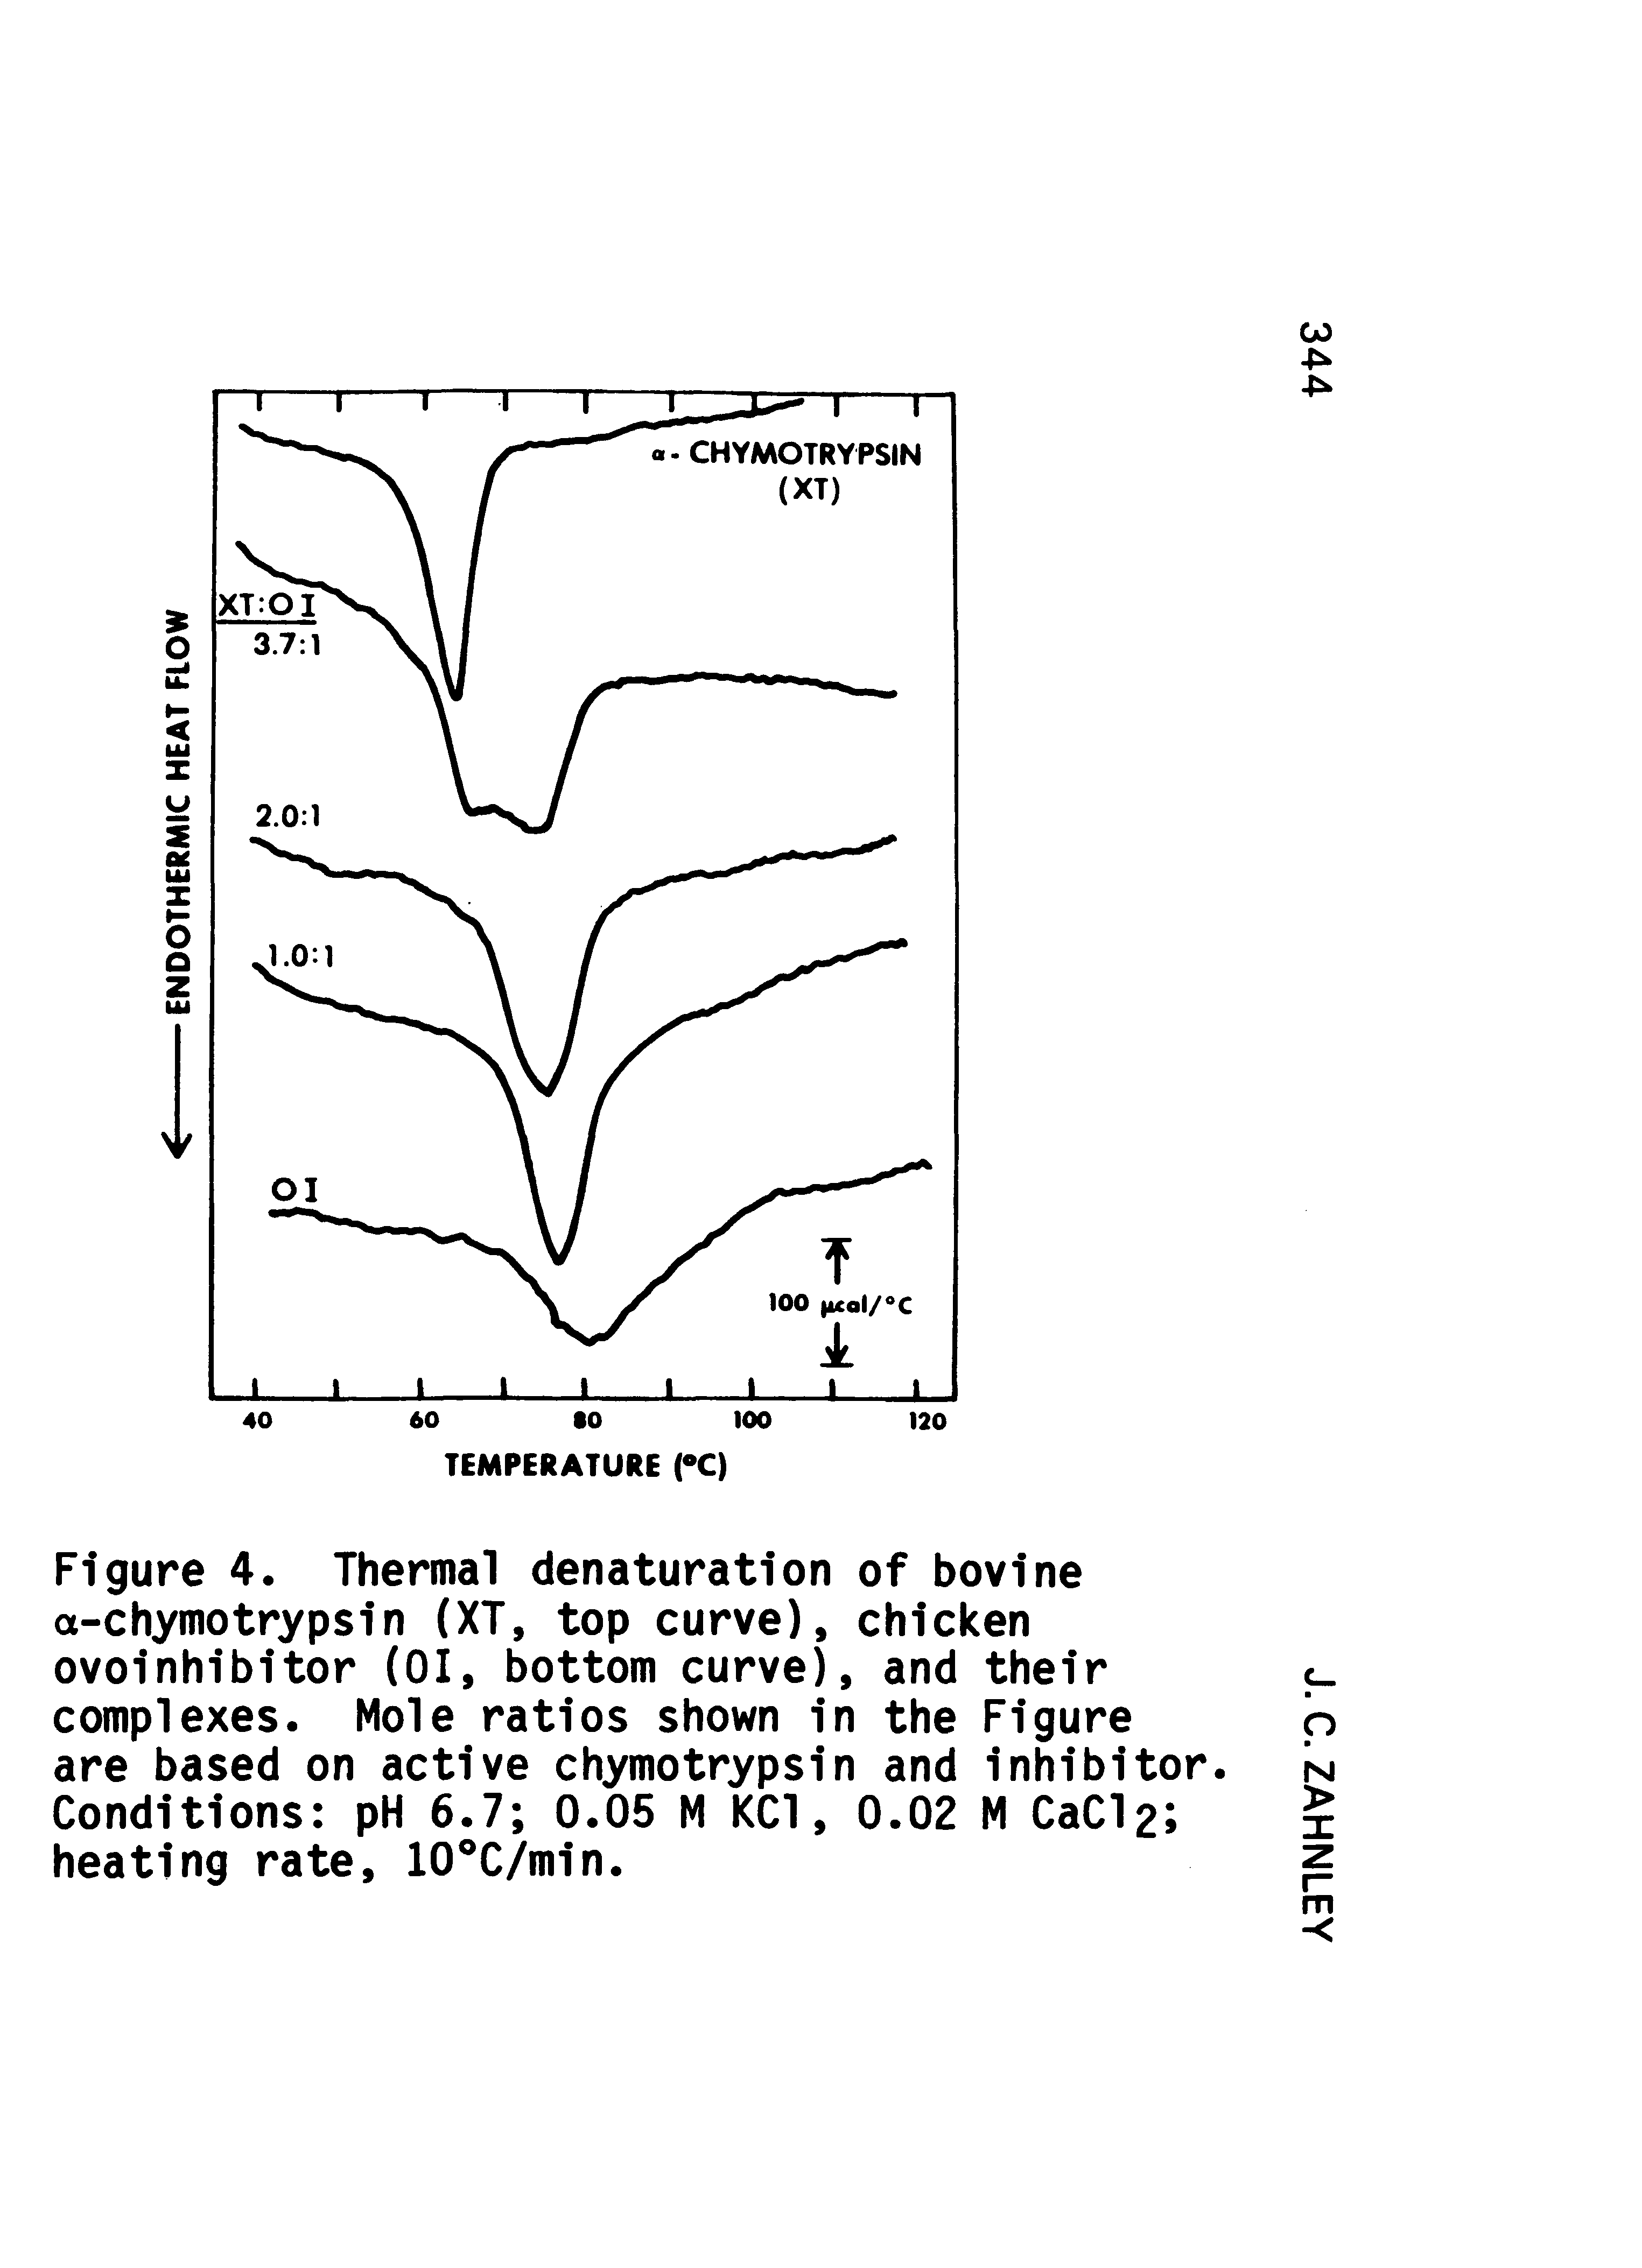 Figure 4. Thermal denaturatlon of bovine o-chymotrypsin (XT, top curve), chicken ovoinhibitor (01, bottom curve), and their complexes. Mole ratios shown In the Figure are based on active chymotrypsin and Inhibitor. Conditions pH 6.7 0.05 M KCl, 0.02 M CaCl2 heating rate, 10 C/m1n.